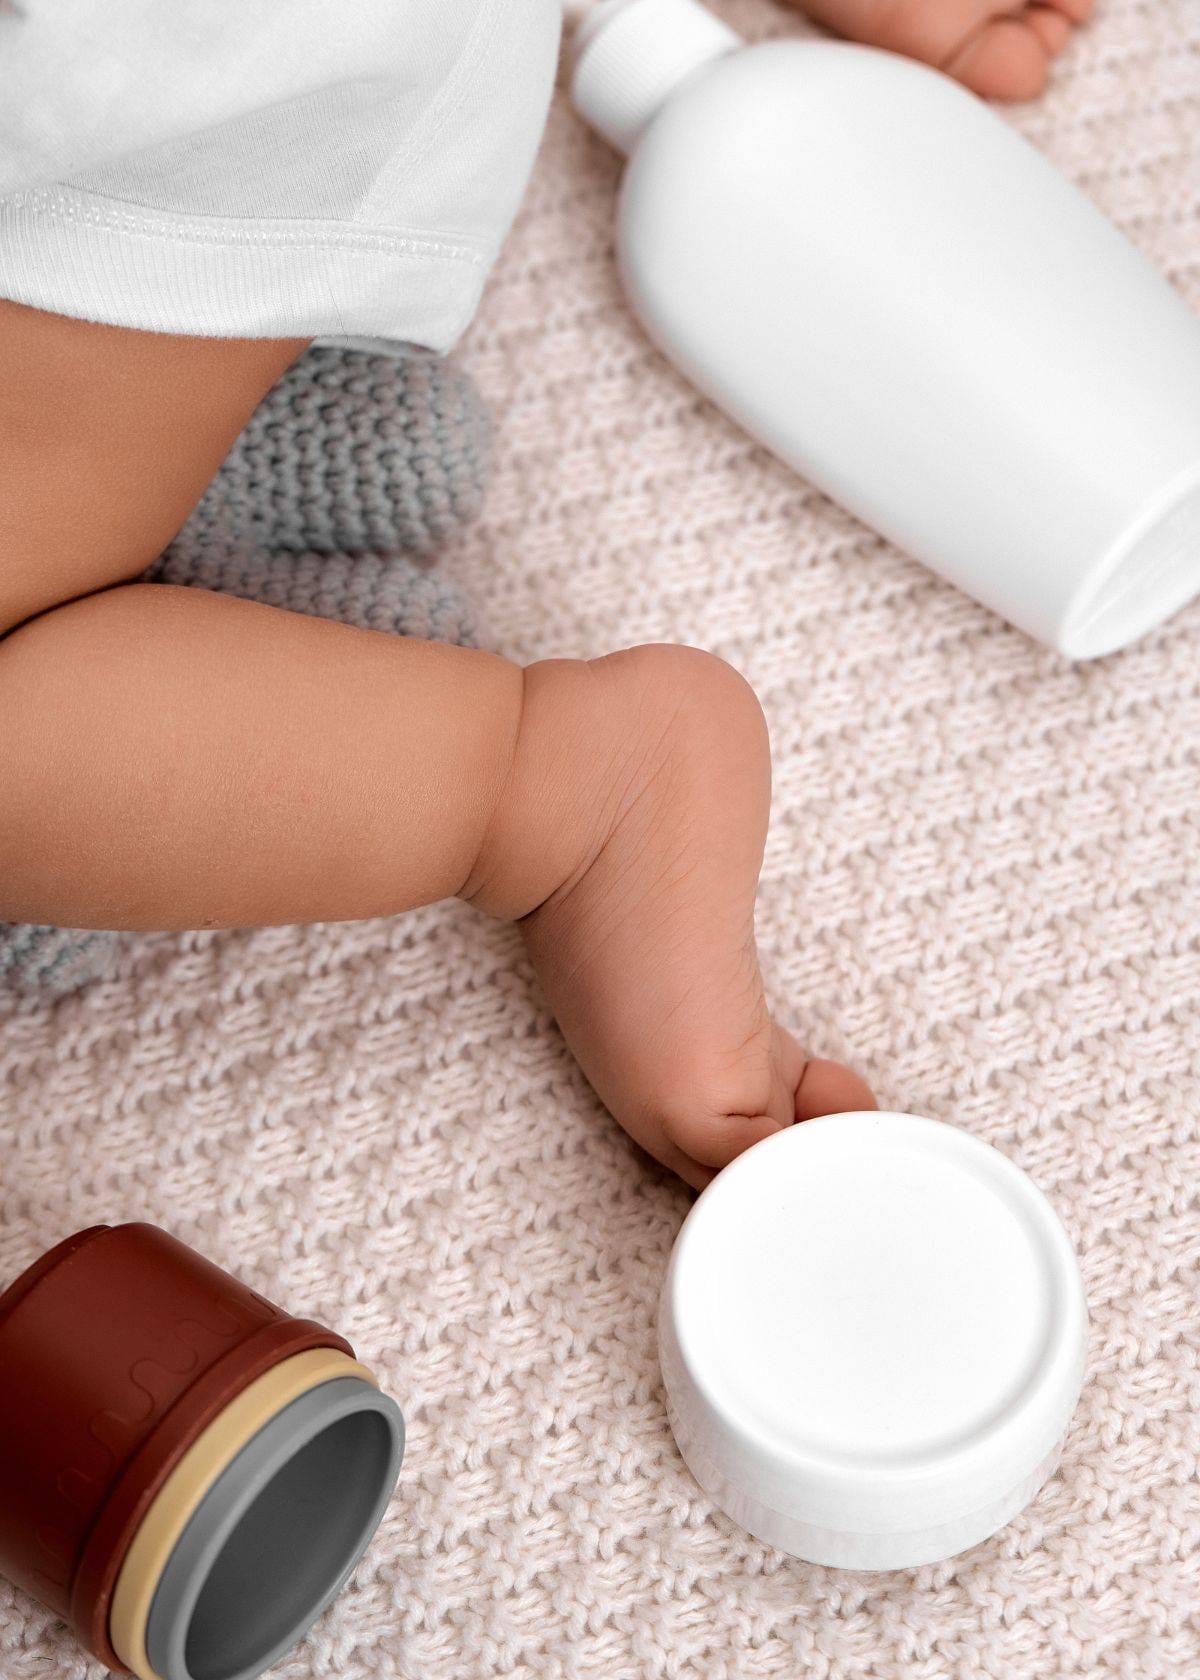 What's the Difference Between Baby Cream and Baby Lotion?